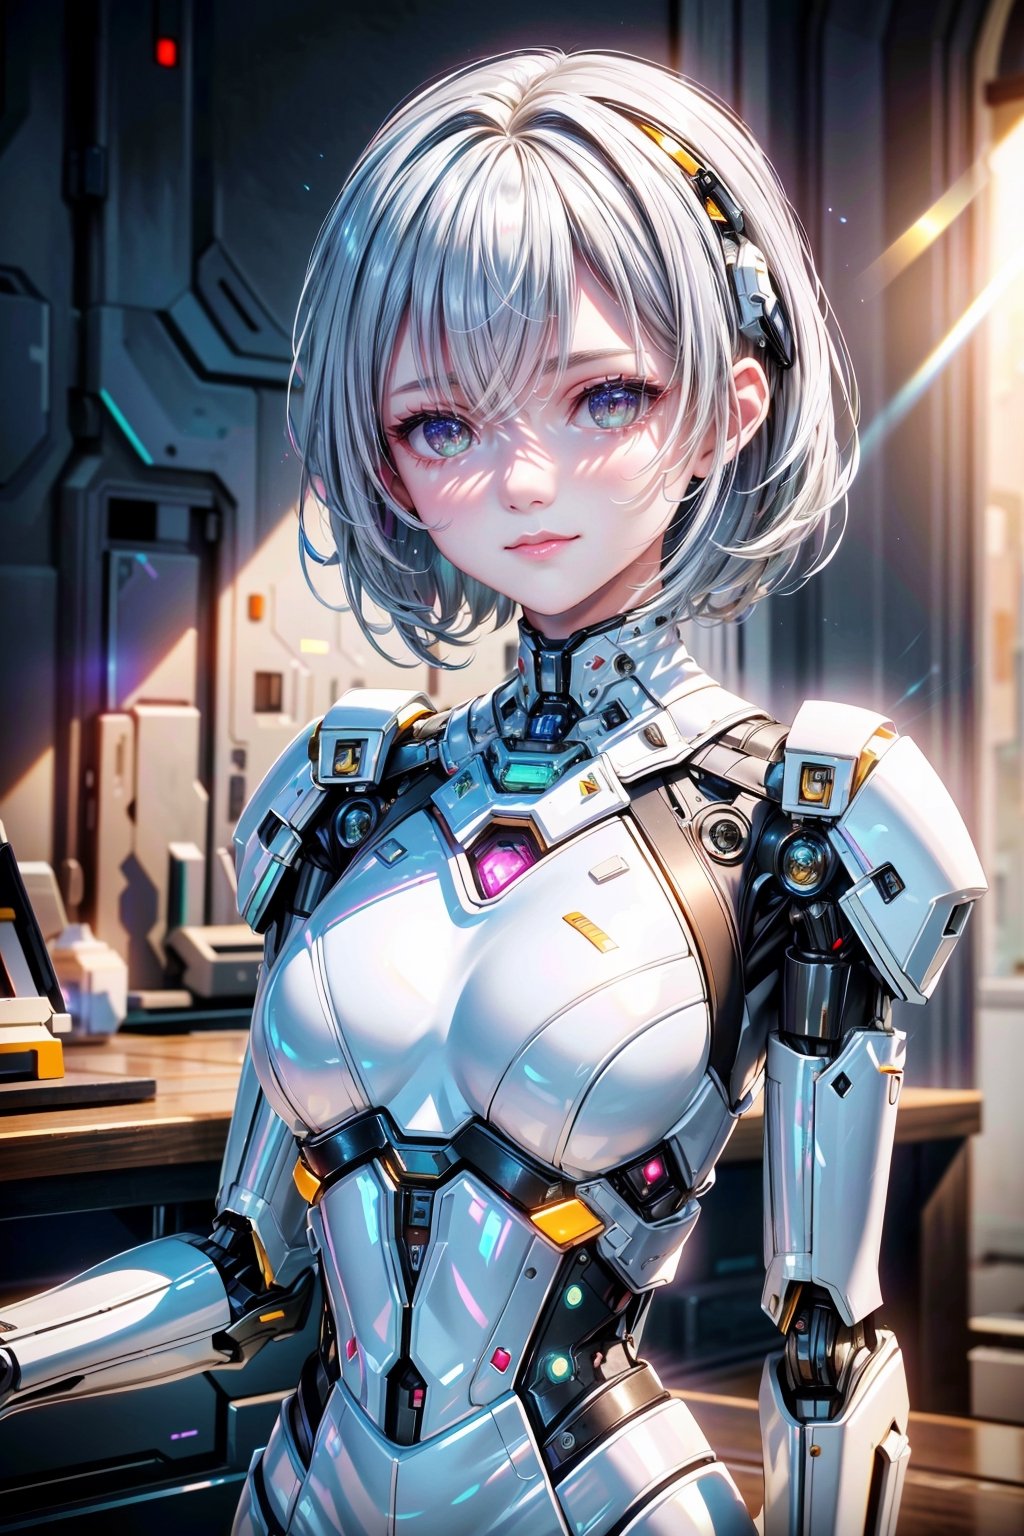 ((high resolution)), ((8K)), ((incredibly absurdres)), break. ((One android girl with happy smile)), break. ((sliver hair:1.5)), ((upper body:1.5)), ((looking at camera:1.2)), break. ((in the cyberstyle city)), ((slender boby)), ((intricate internal structure)), ((brighten parts:1.5)), break. ((extremely detailed mecha suit:1.2)), break. (robotic arms), (robotic legs), (robotic hands), ((robotic joint:1.2)), break. Cinematic angle, ultra fine quality, masterpiece, best quality, incredibly absurdres, fhighly detailed, sharp focus, (photon mapping, radiosity, physically-based rendering, automatic white balance), masterpiece, best quality, Mecha body, furure_urban, incredibly absurdres,masterpiece,best quality,incredibly absurdres